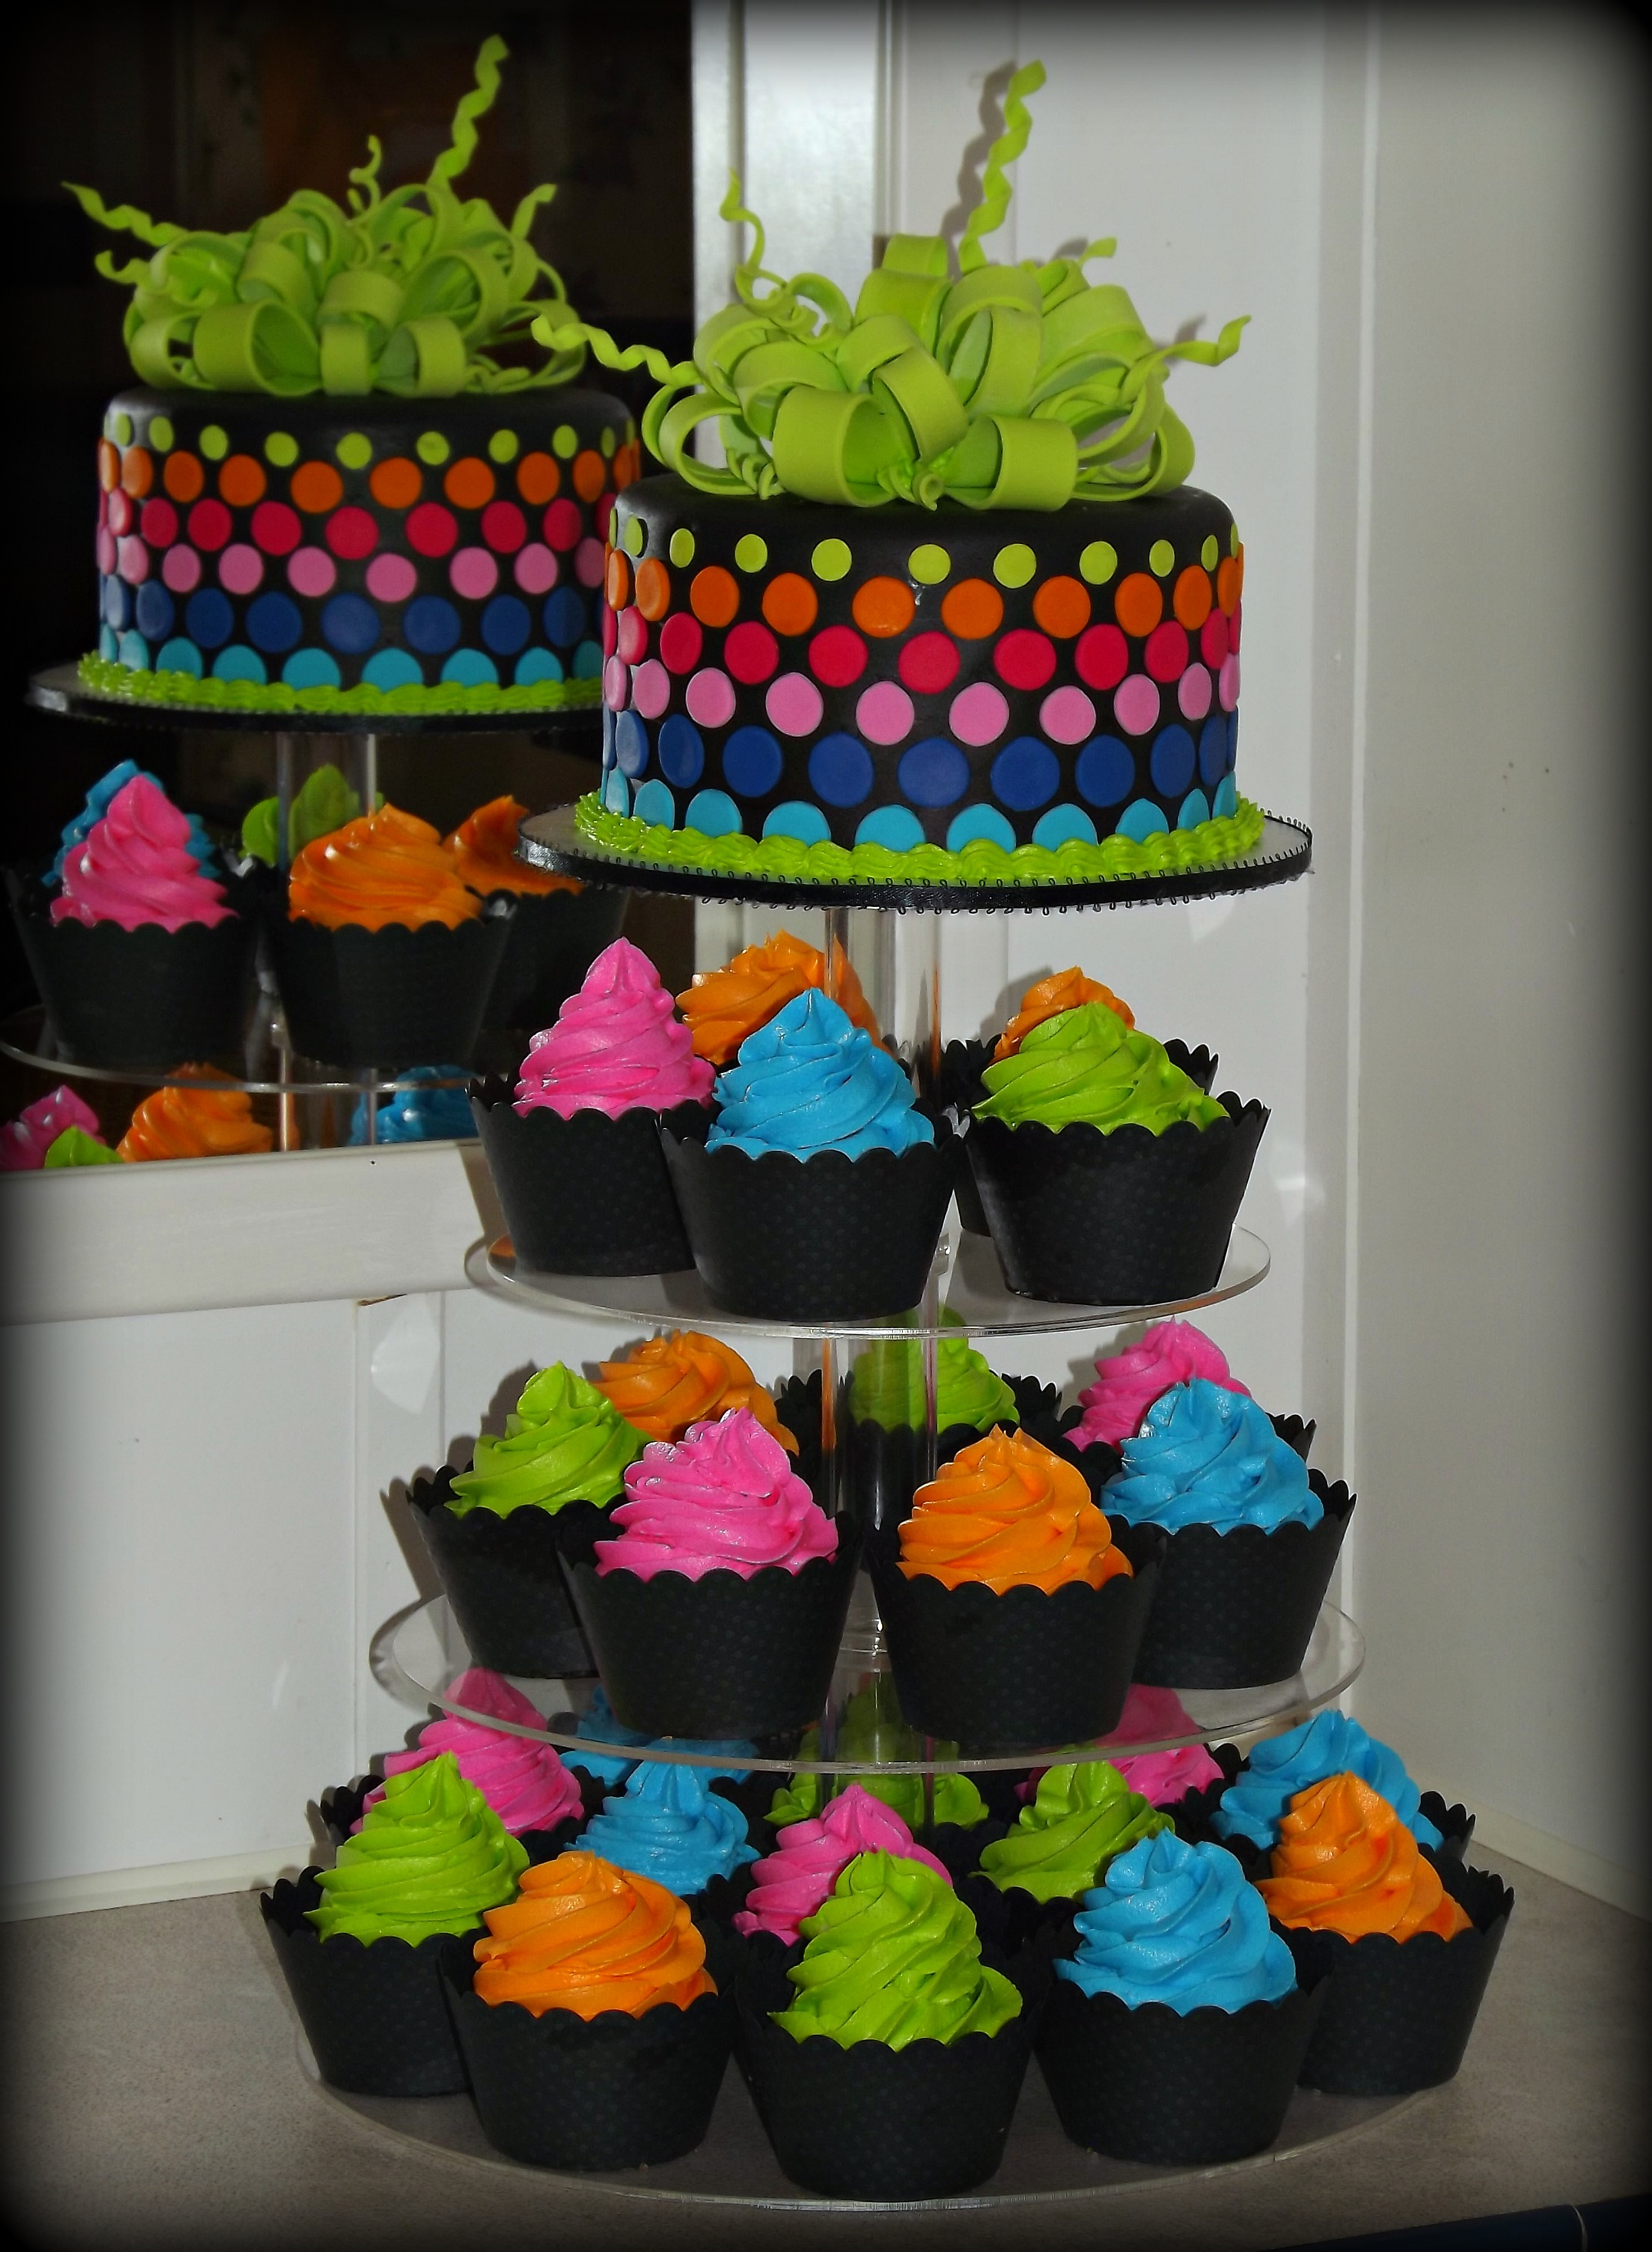 Neon Cake with Cupcakes